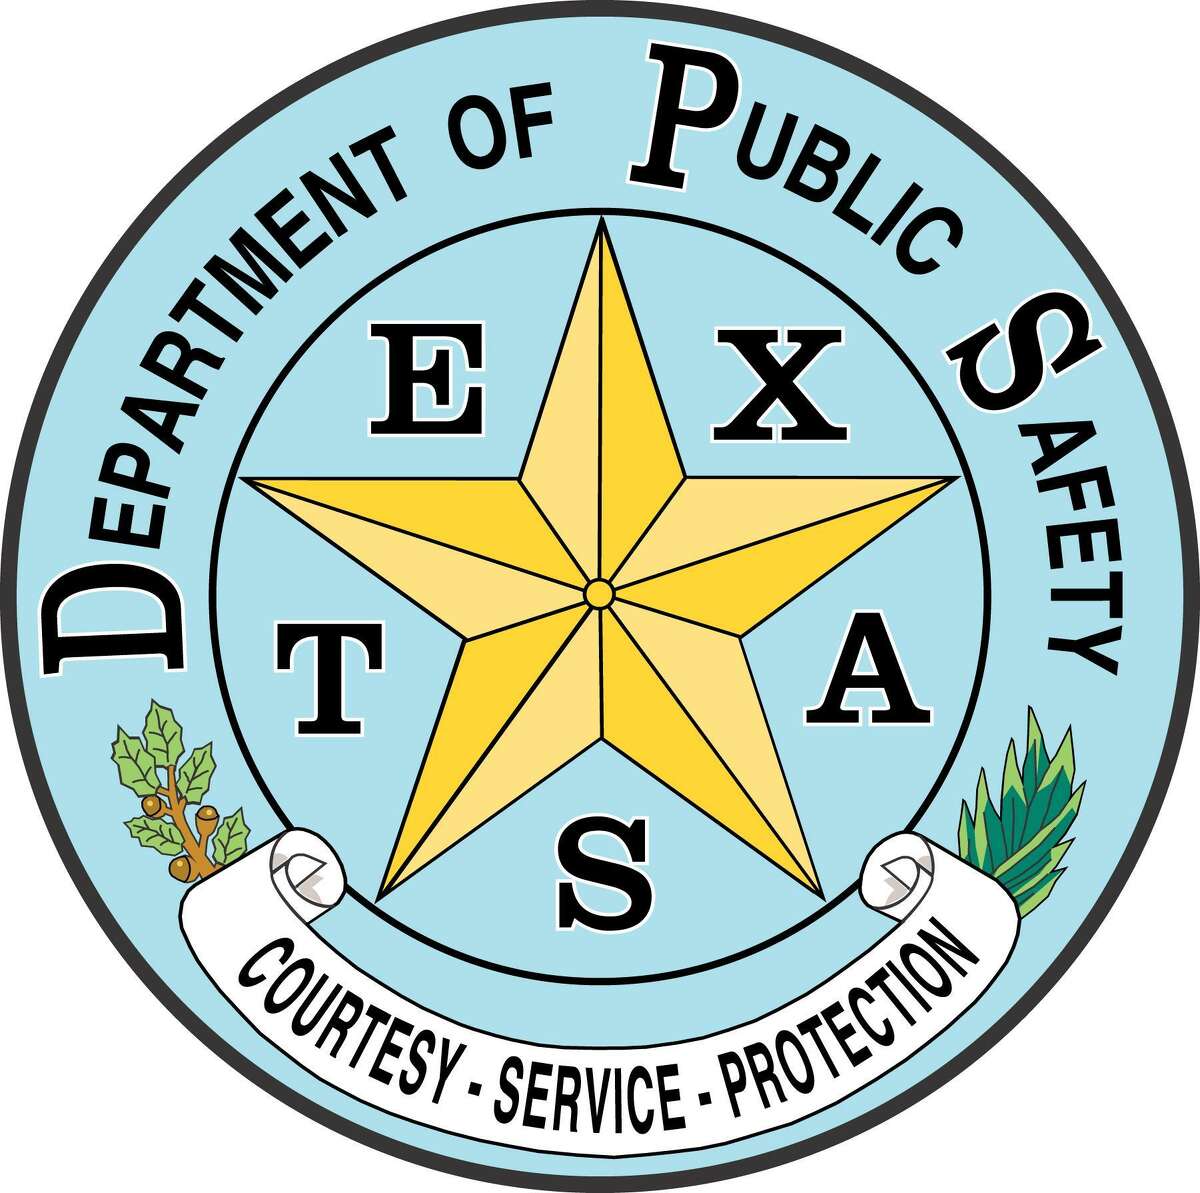 Driver License  Department of Public Safety